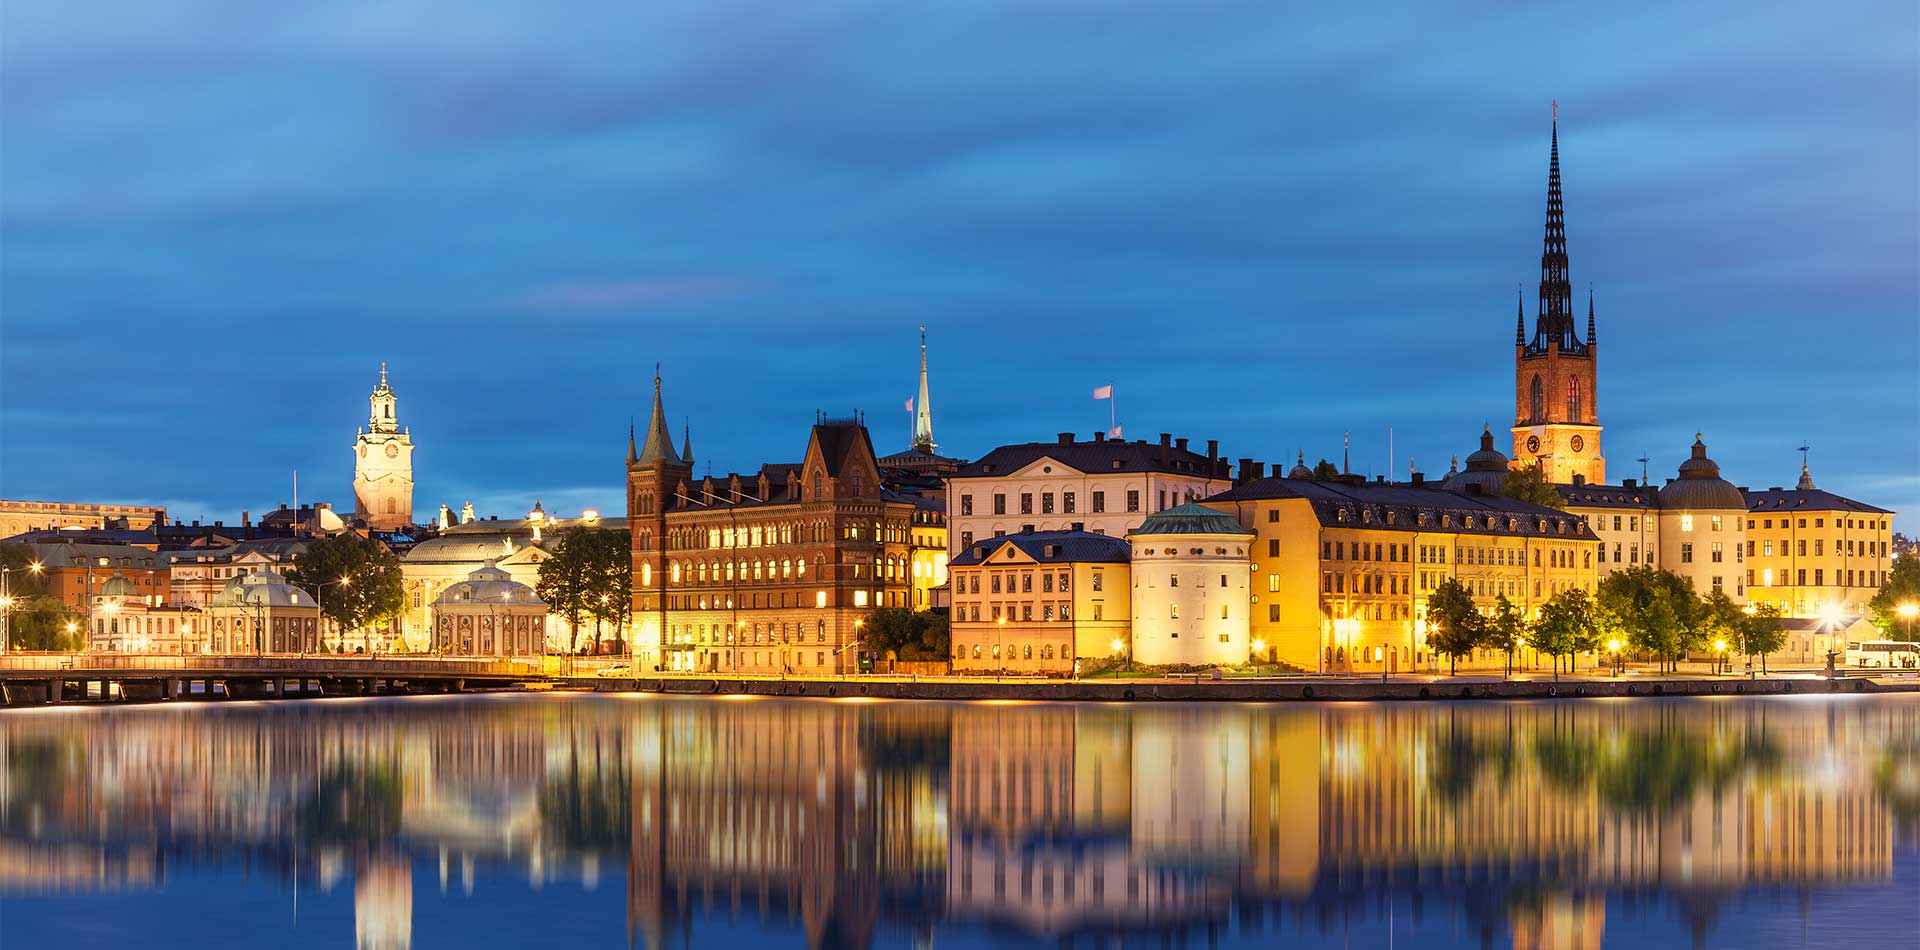 Night view of Stockholm, Sweden